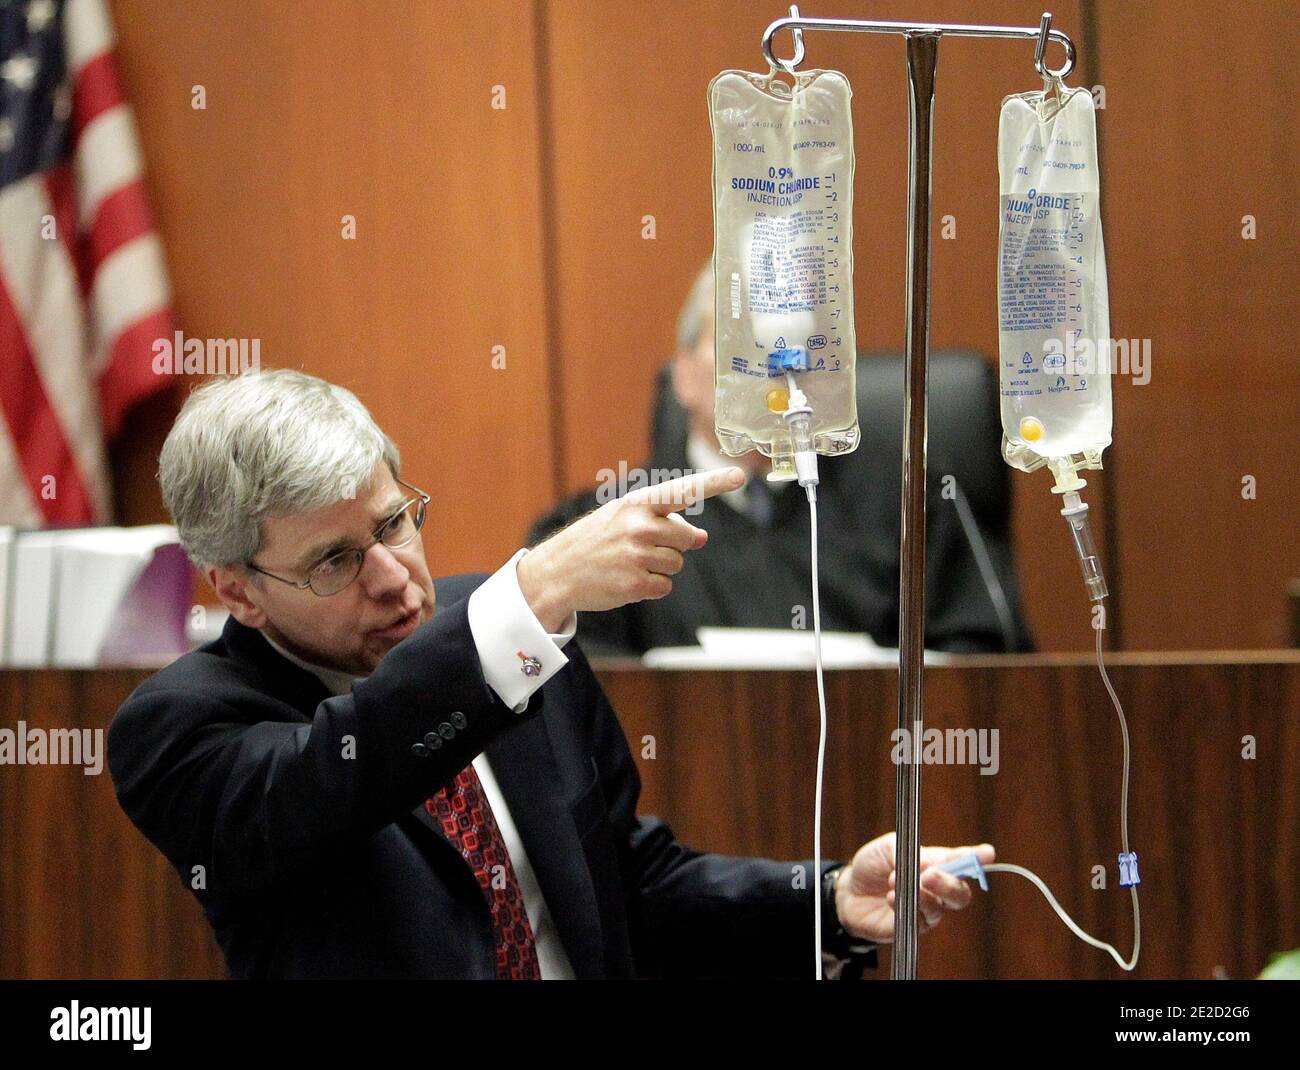 Anesthesiology expert Dr. Steven Shafer, left, demonstrates the use of propofol after placing a propofol bottle in an empty saline bag during Dr. Conrad Murray's involuntary manslaughter trial in Los Angeles on October 20, 2011. Murray has pleaded not guilty and faces four years in prison and the loss of his medical license if convicted of involuntary manslaughter in Michael Jackson's death. Photo by Reed Saxon/Pool/ABACAPRESS.COM Stock Photo